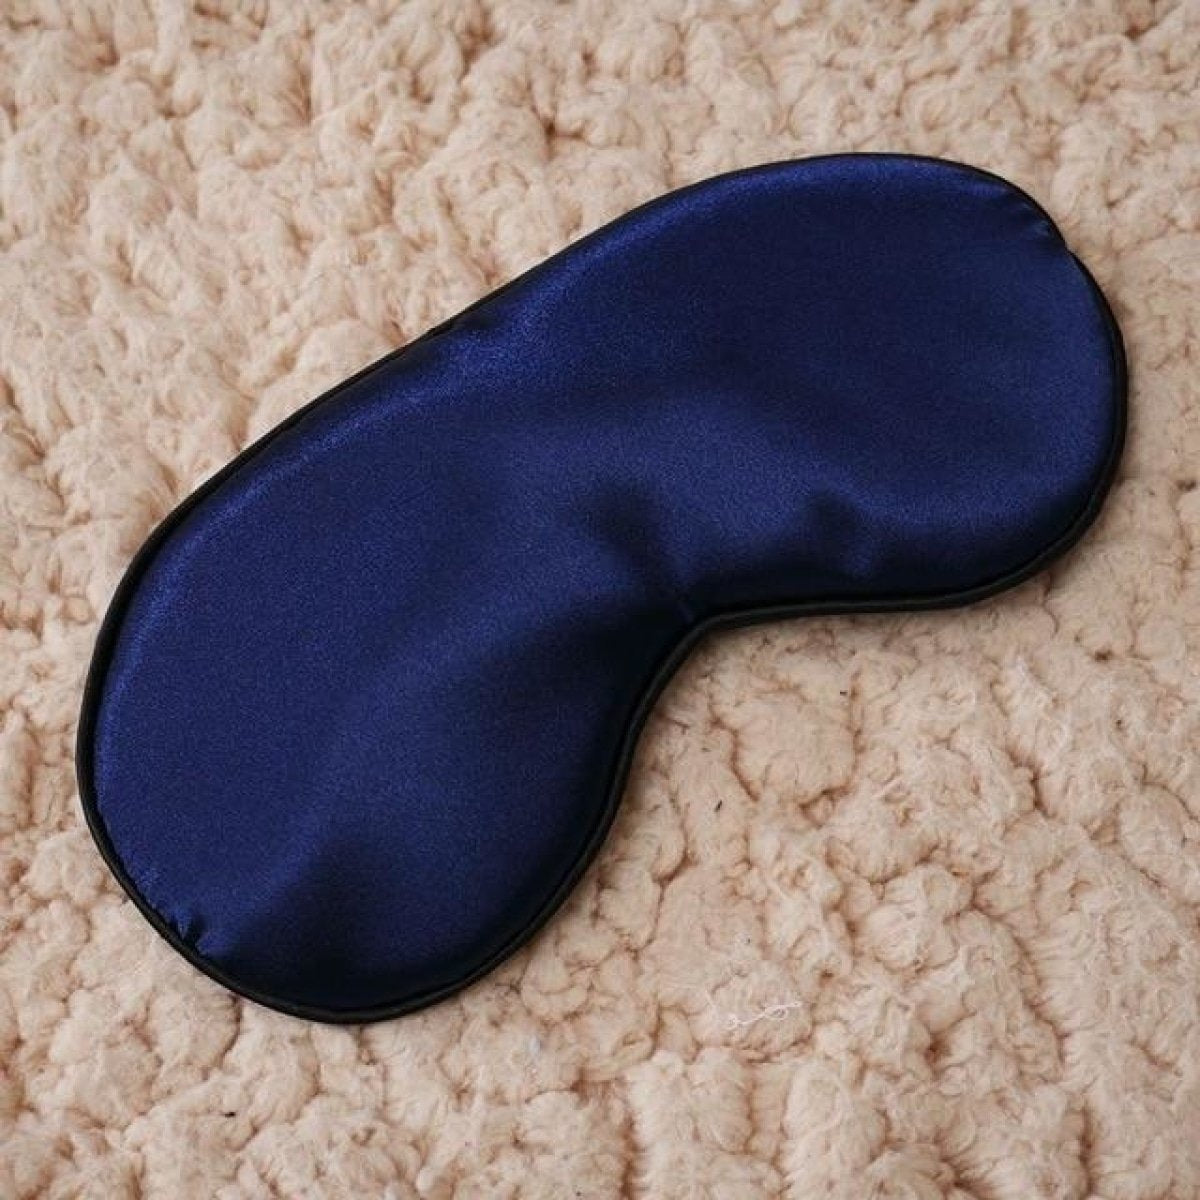 Silk Sleep Rest Eye Mask Padded Shade Cover Travel Relax Aid | Asia Sell